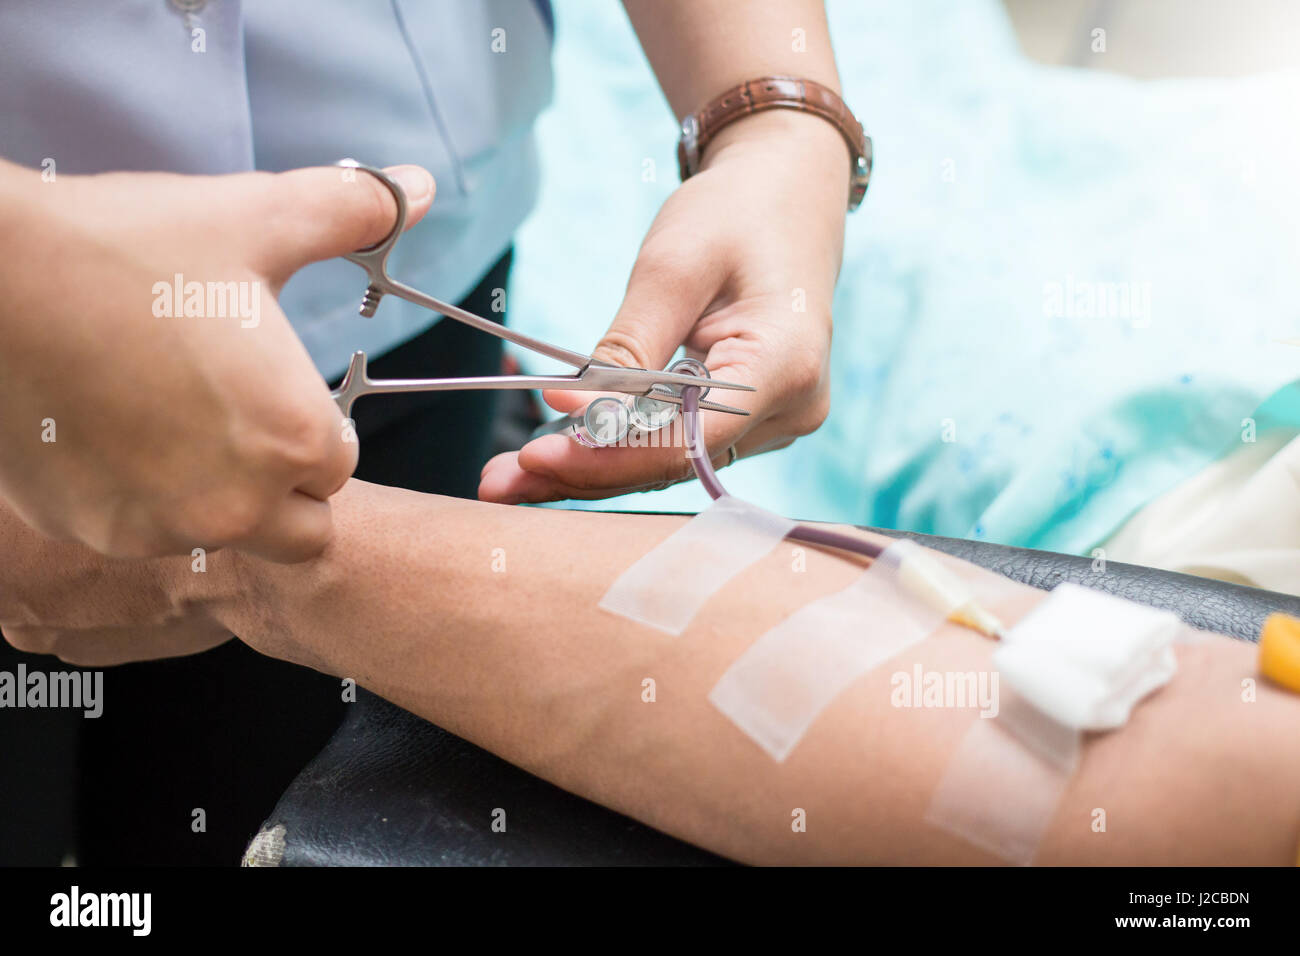 Donate blood using a needle in the arm. Stock Photo